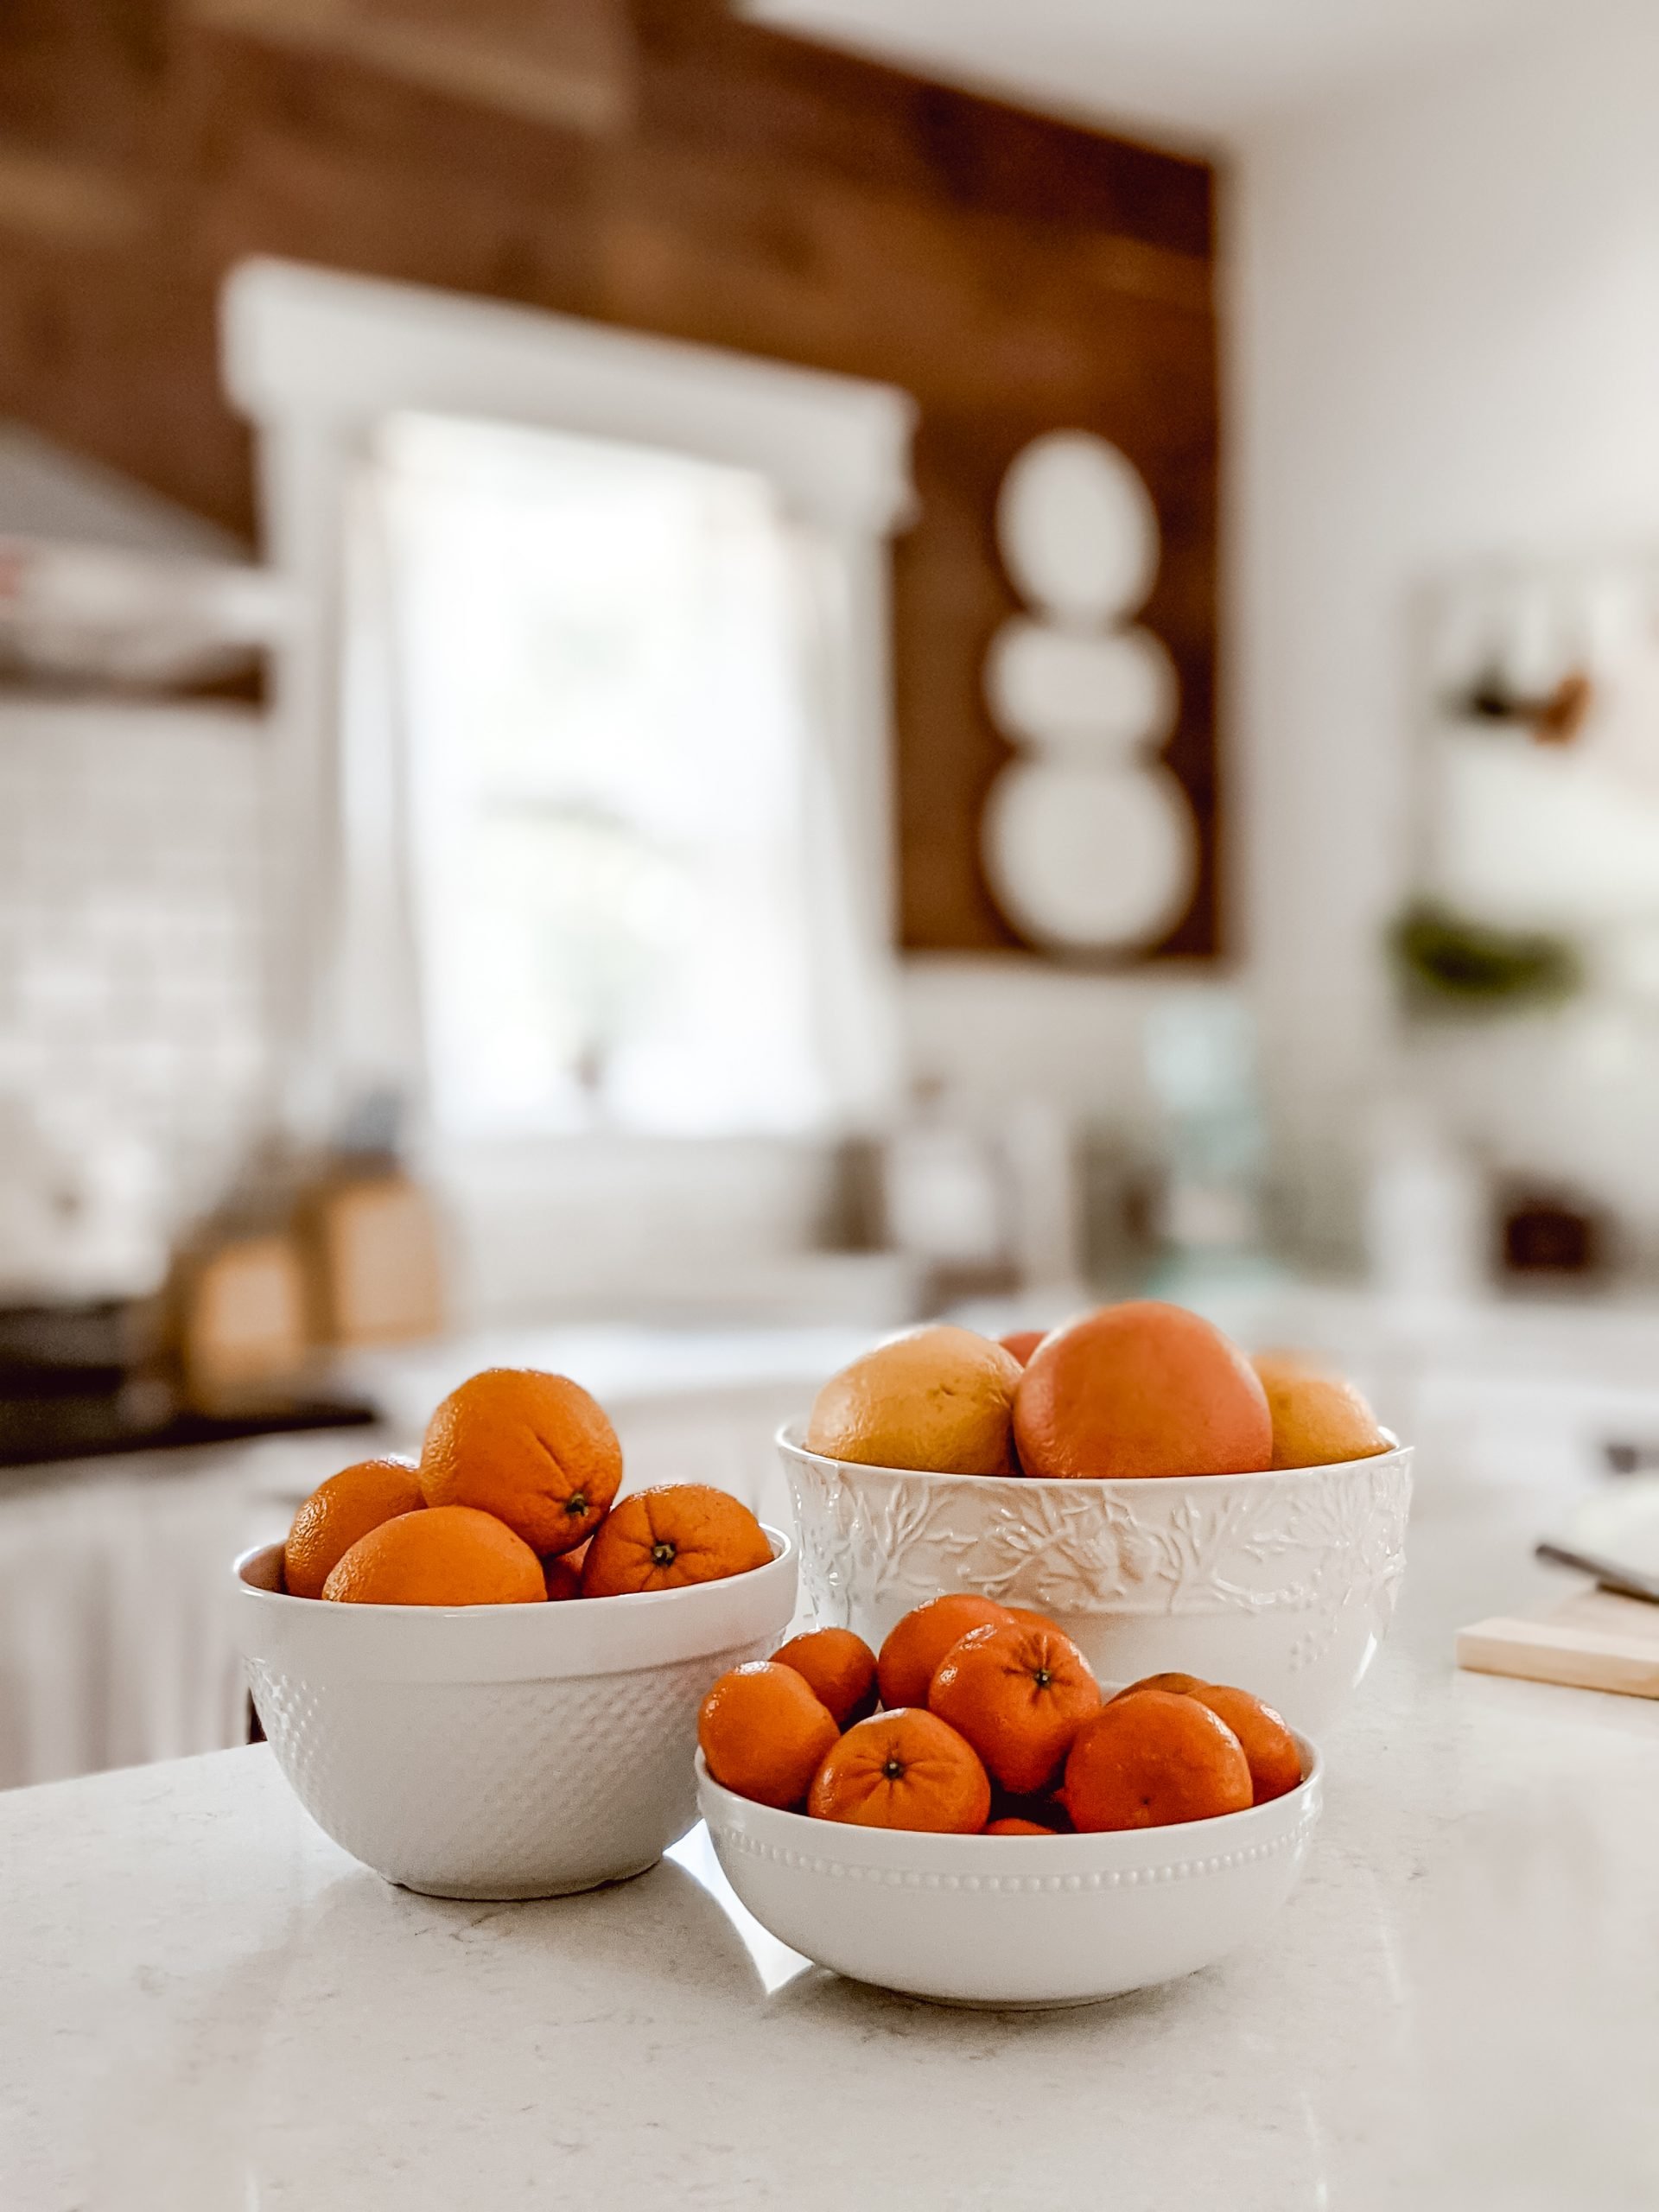 white bowls of oranges, grapefruit, and clementines